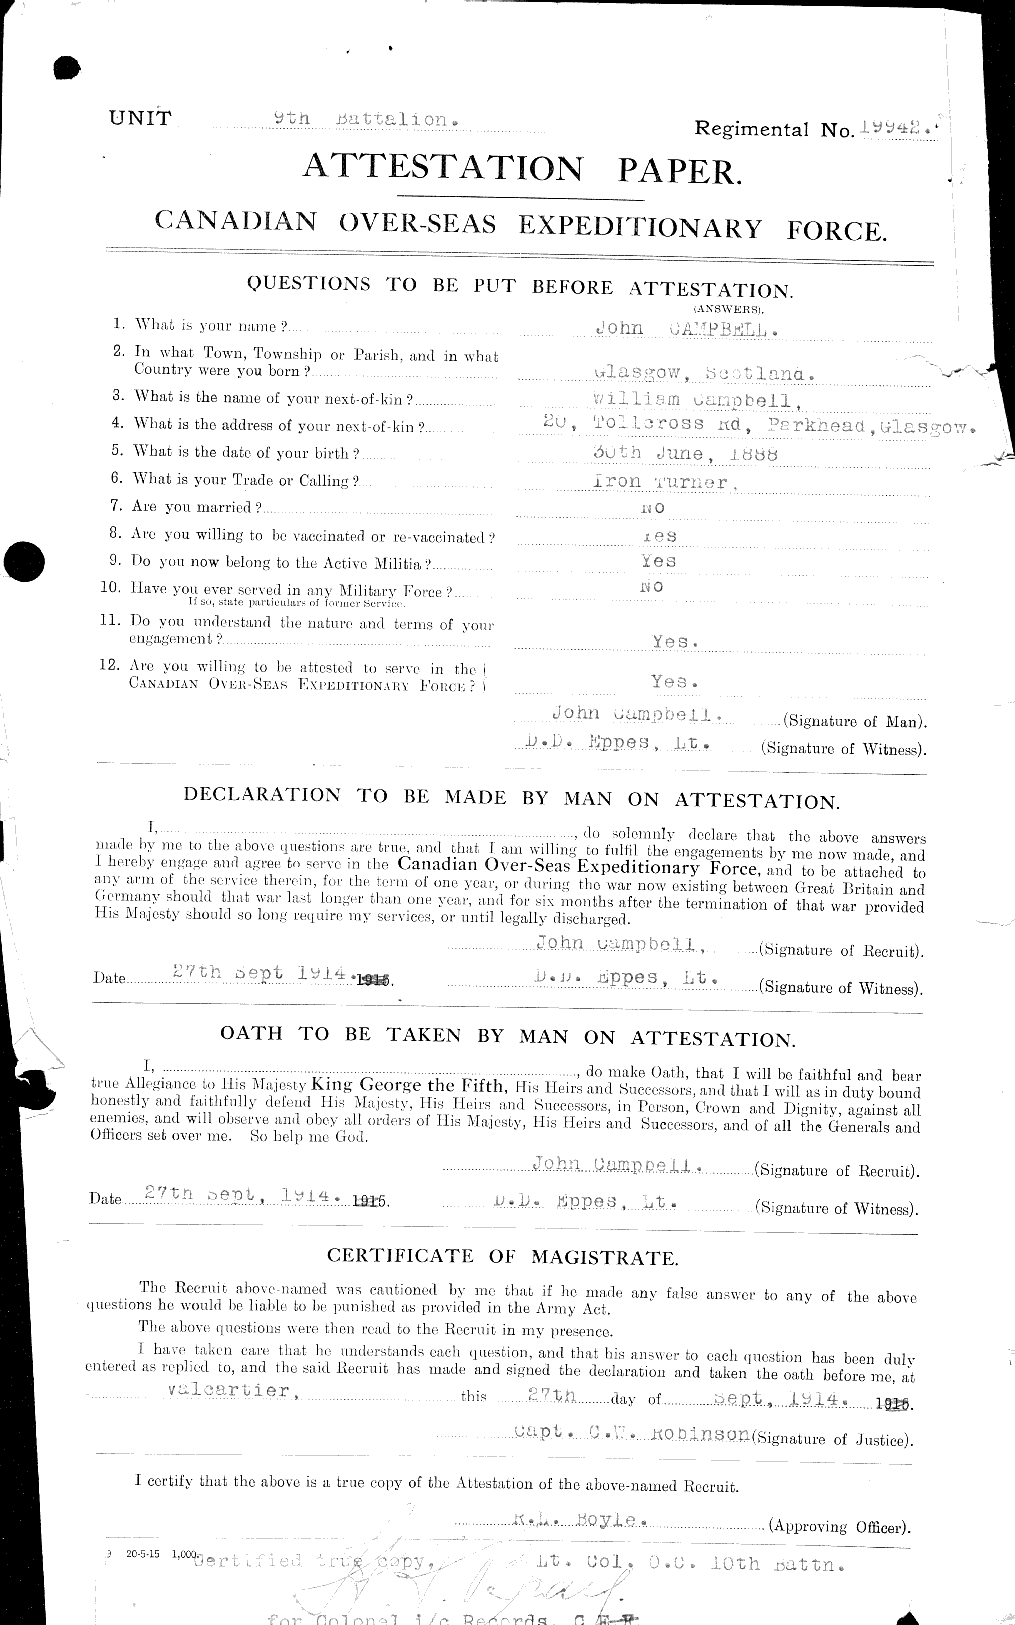 Personnel Records of the First World War - CEF 006795a